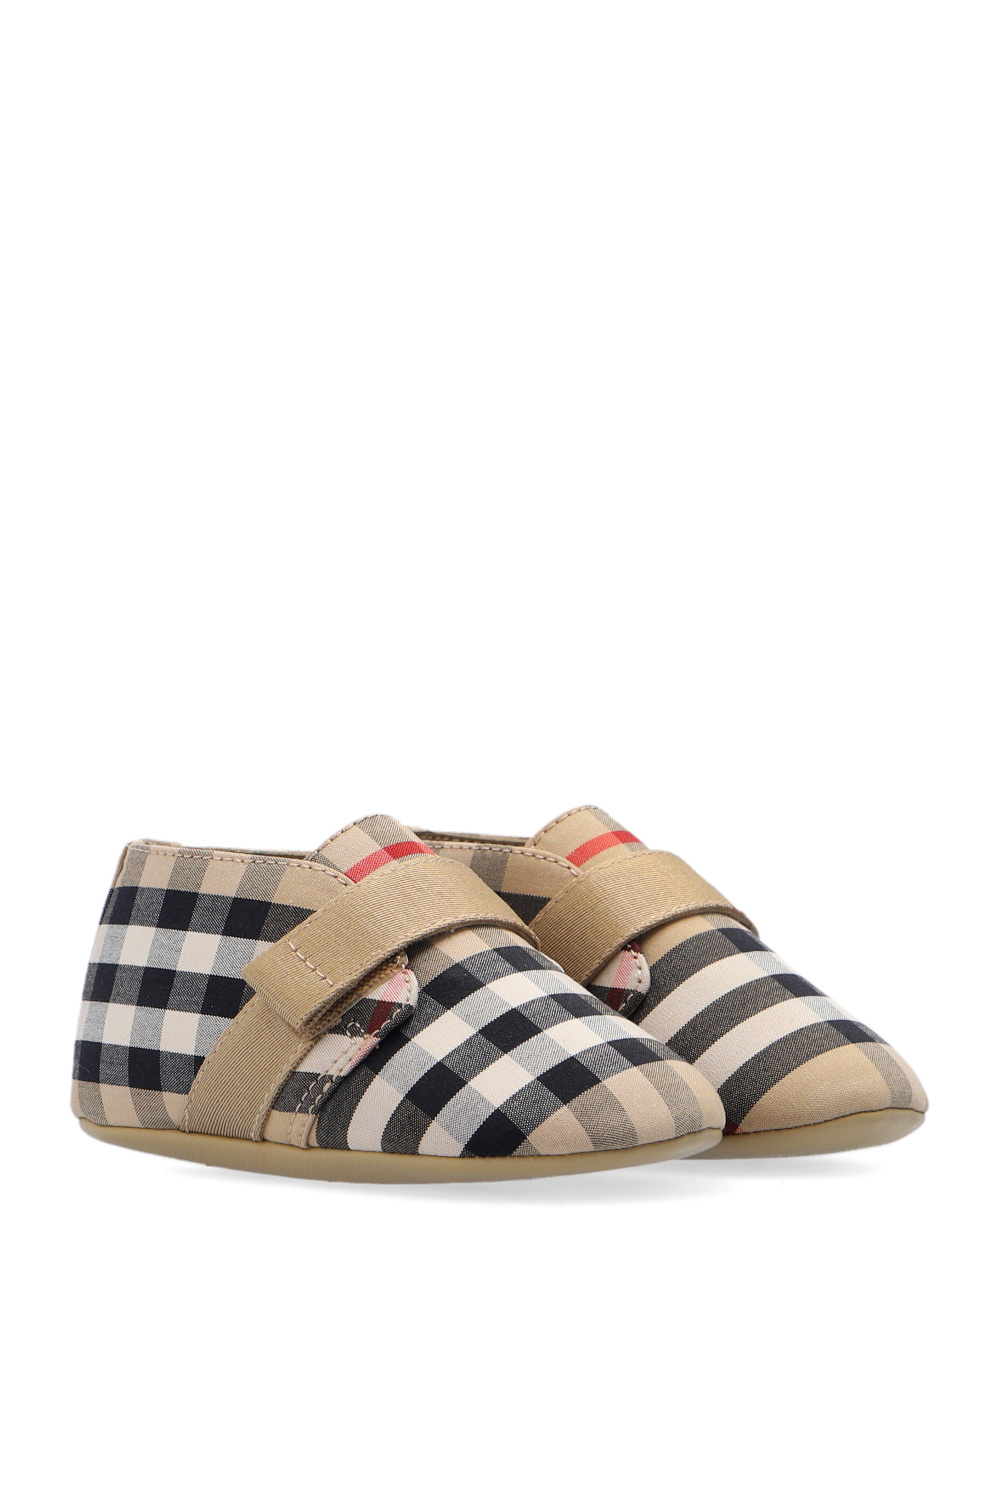 Burberry Kids Checked shoes